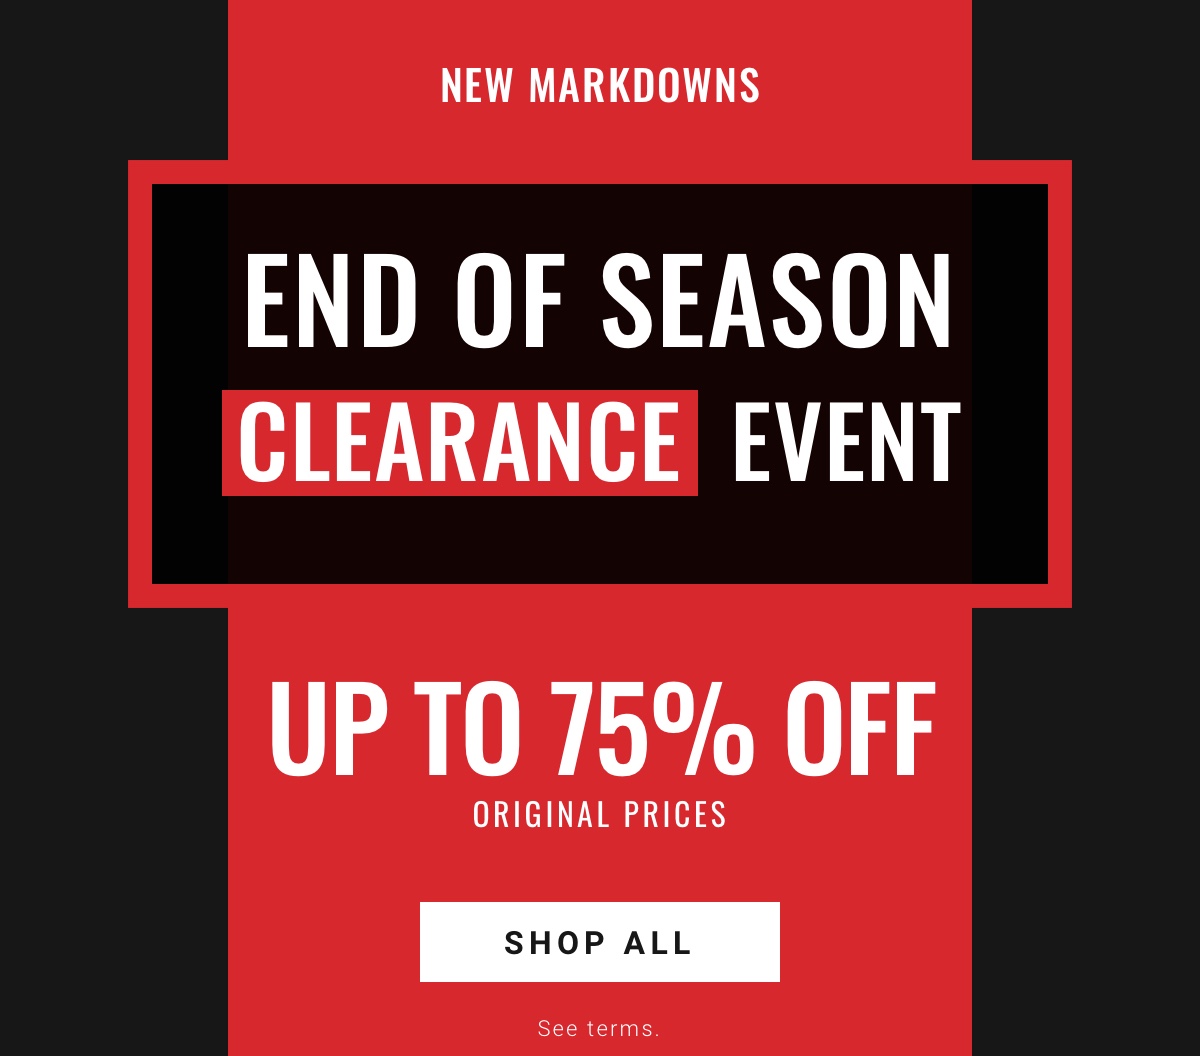 New Markdowns|End of Season Clearance Event|Up to 75% Off Original Prices